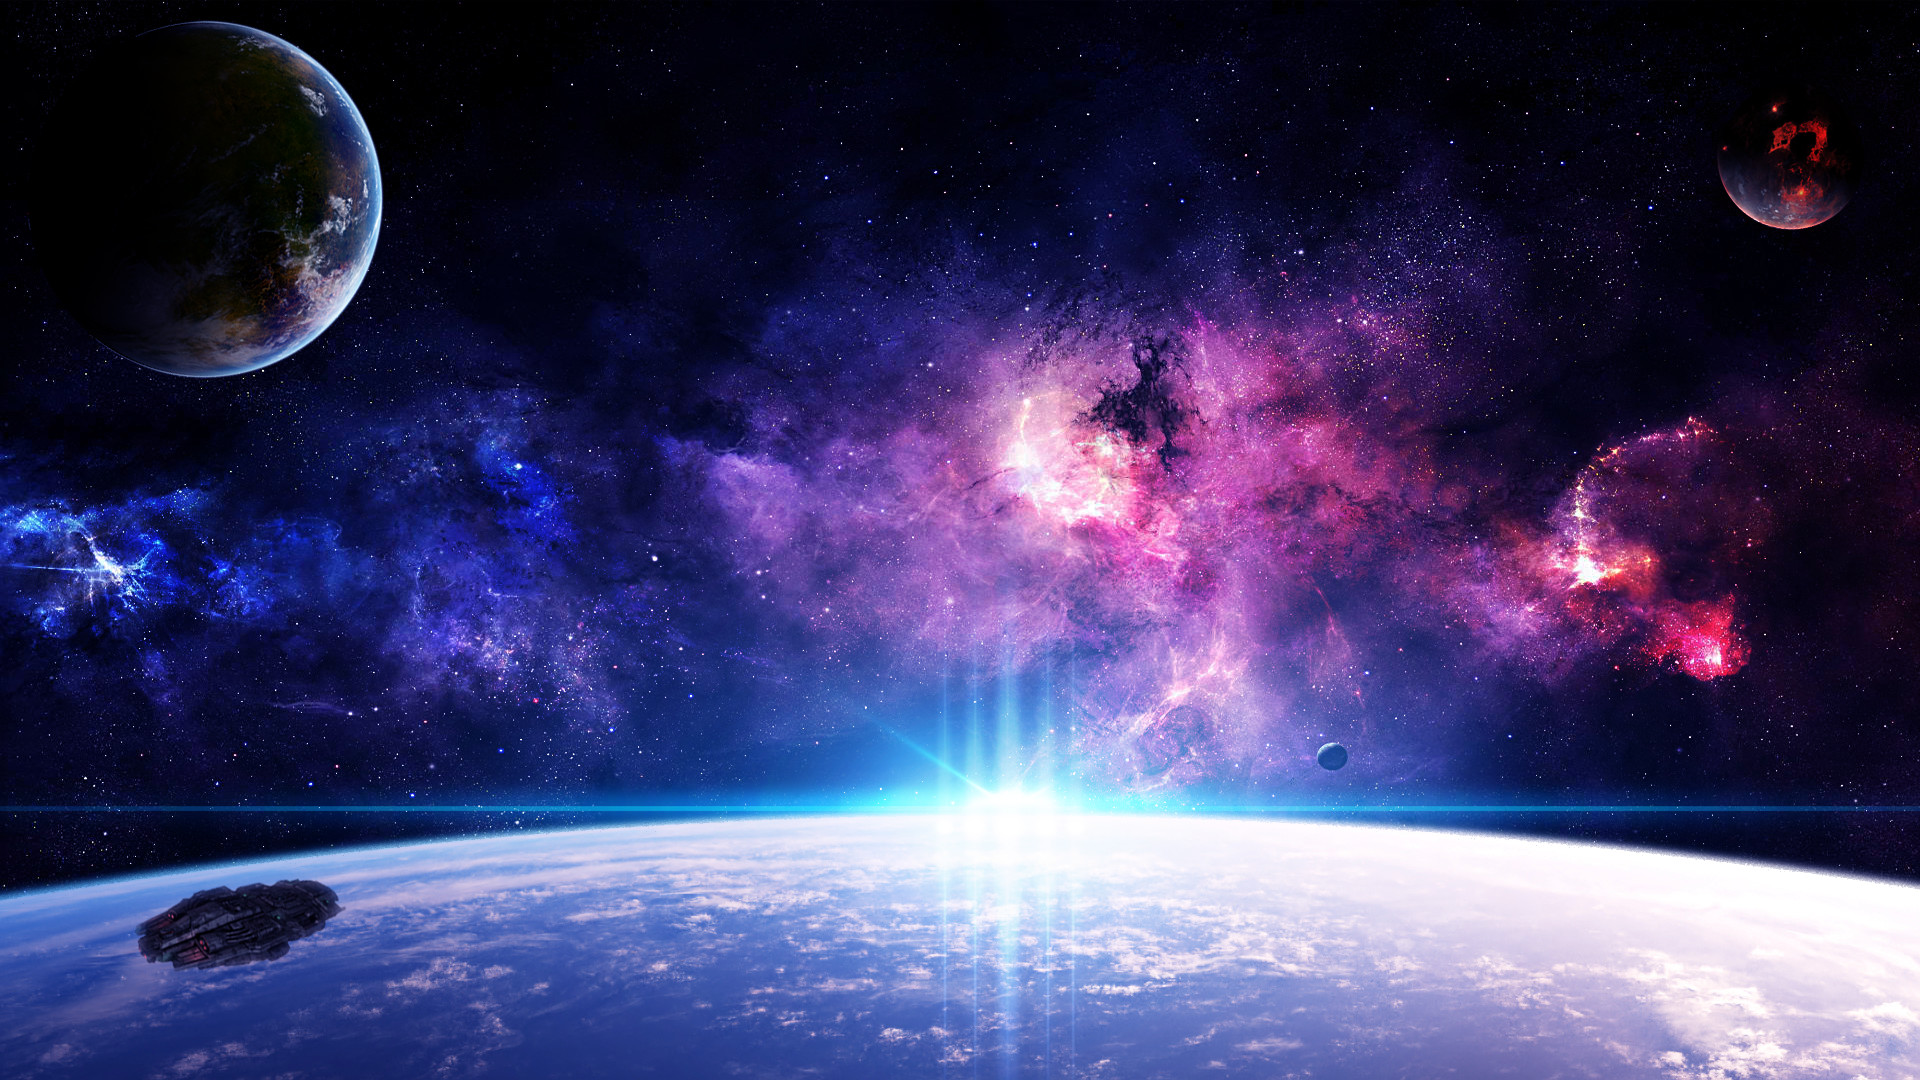 Space Hd Wallpapers 1080P wallpaper Wallpapers Photos Pictures Space Pinterest Hd wallpaper and Wallpaper